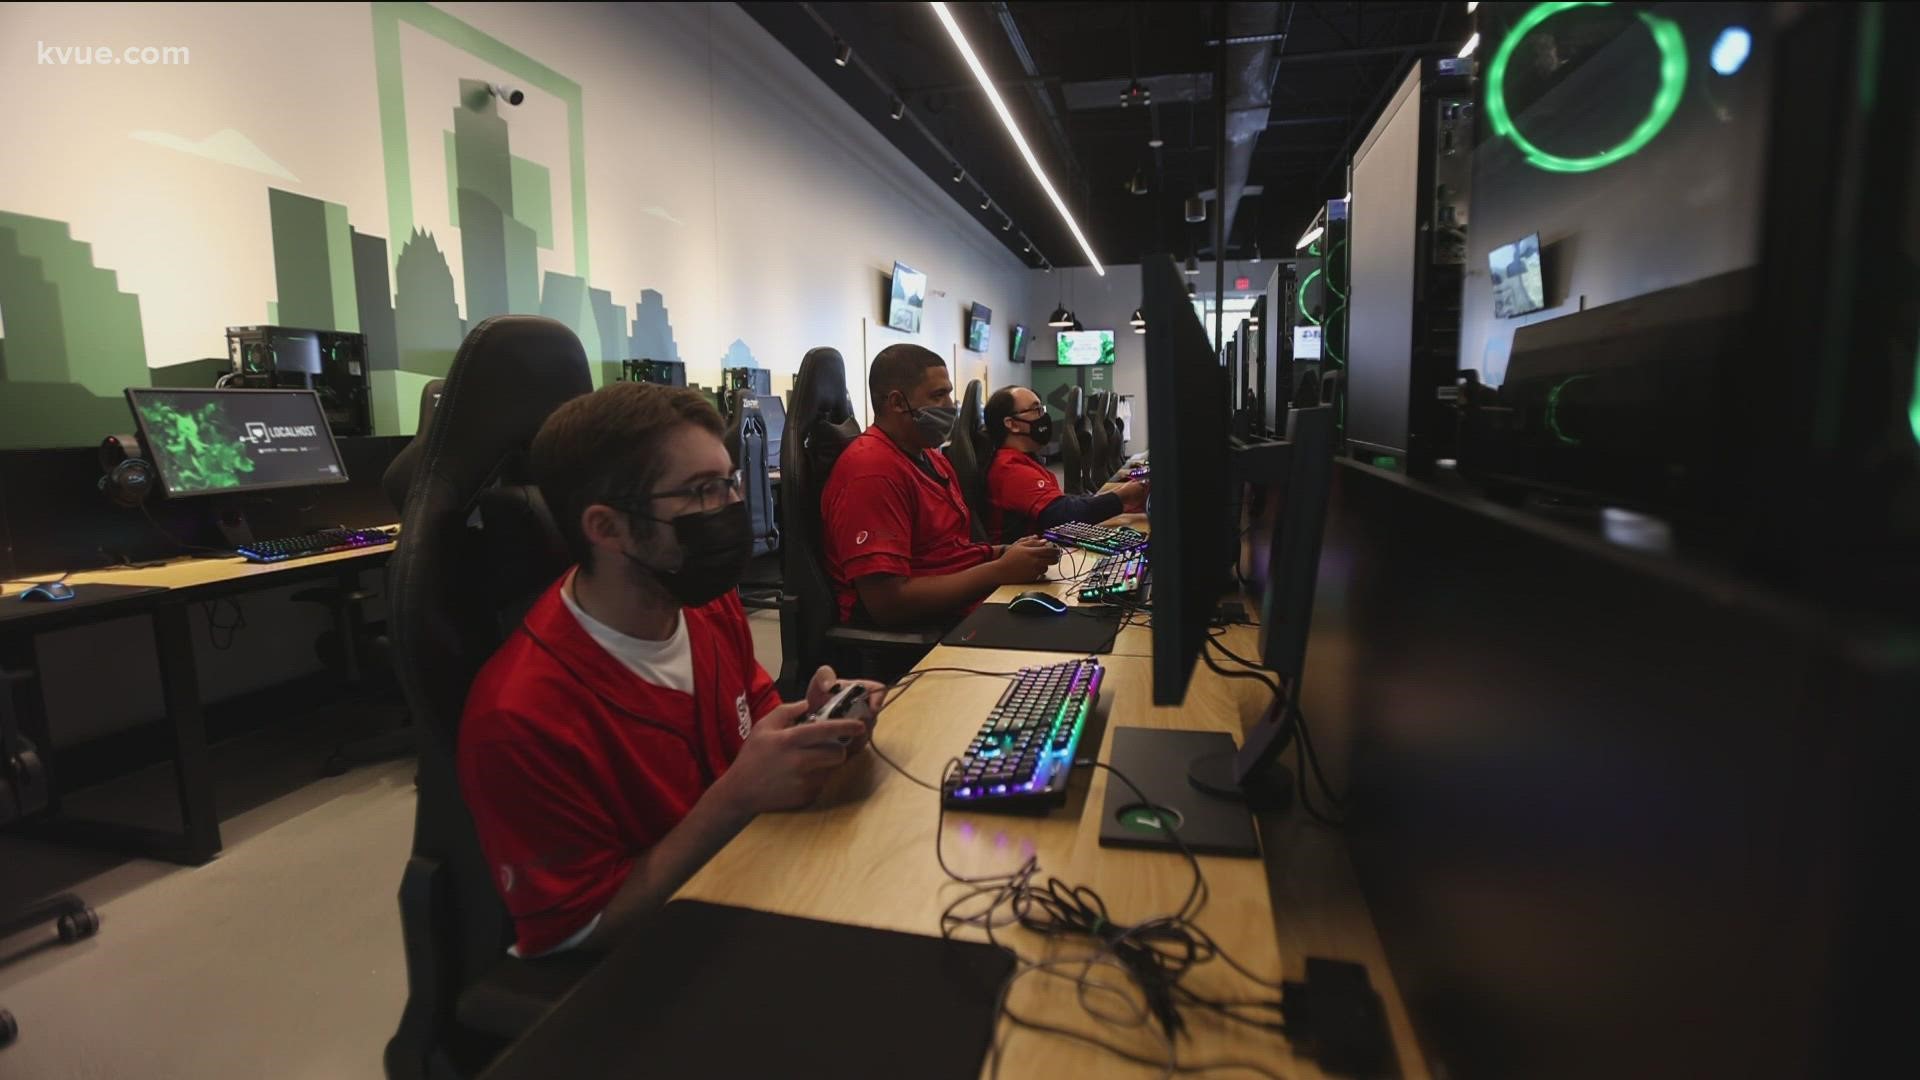 Esports is a growing industry, and for some in Central Texas, playing video games means even more. Special Olympics is growing its esports groups.